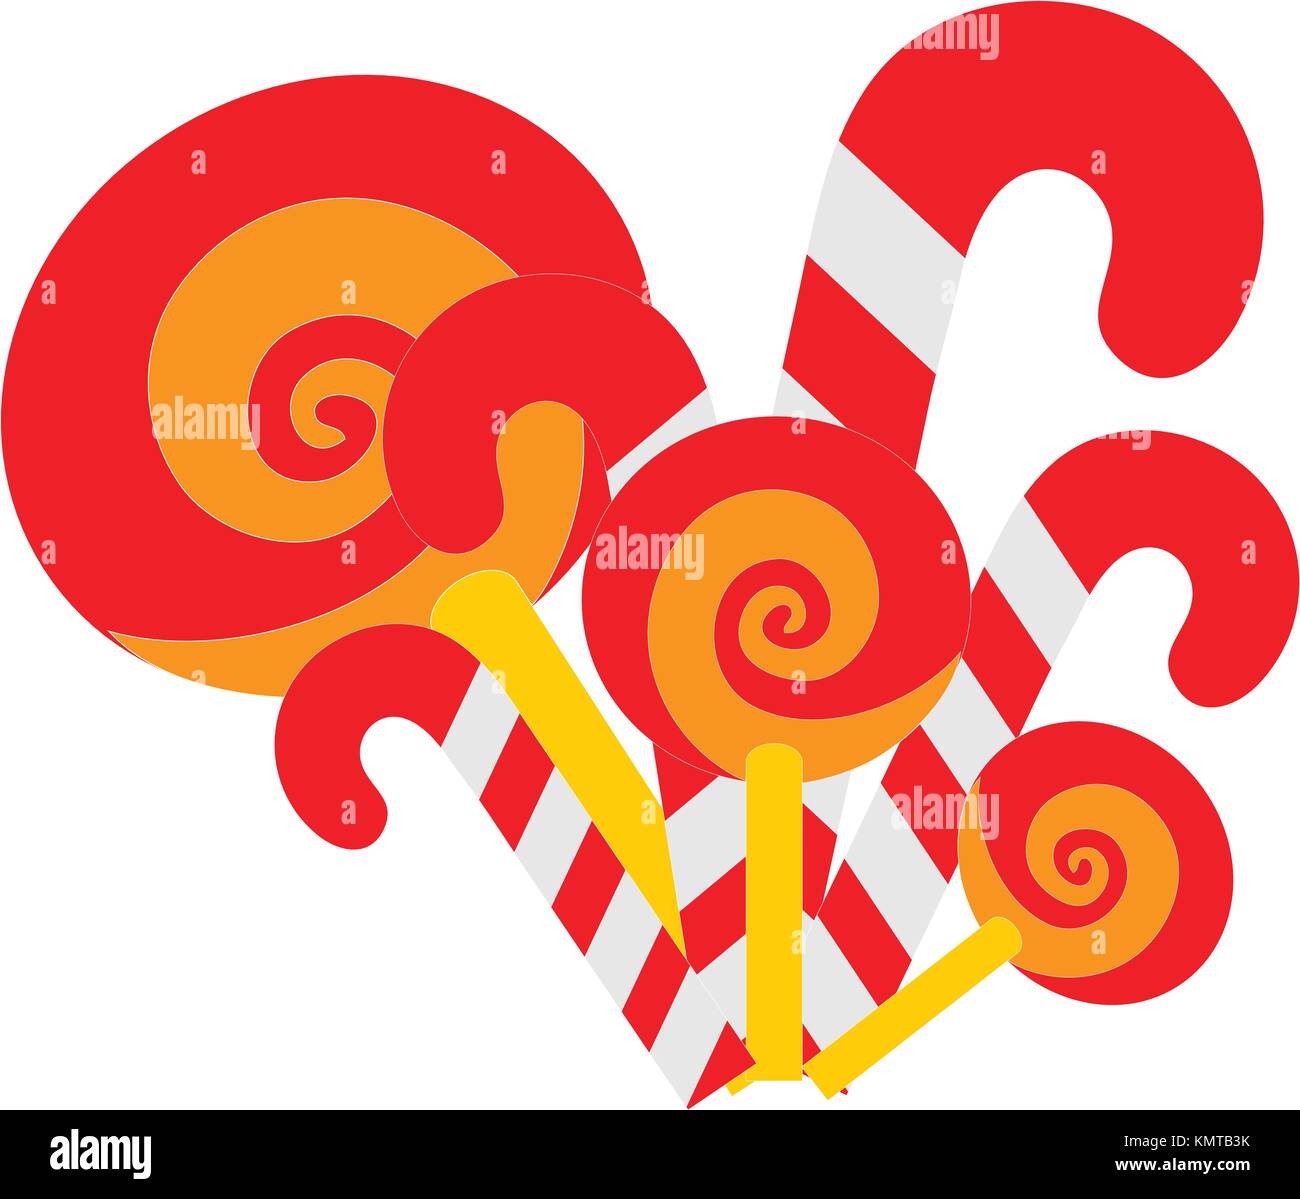 Candy Canes and lollypops or lollipops isolated on white background. Red white and orange candy cane and lollipop or lollypop candies. Traditional Chr Stock Vector